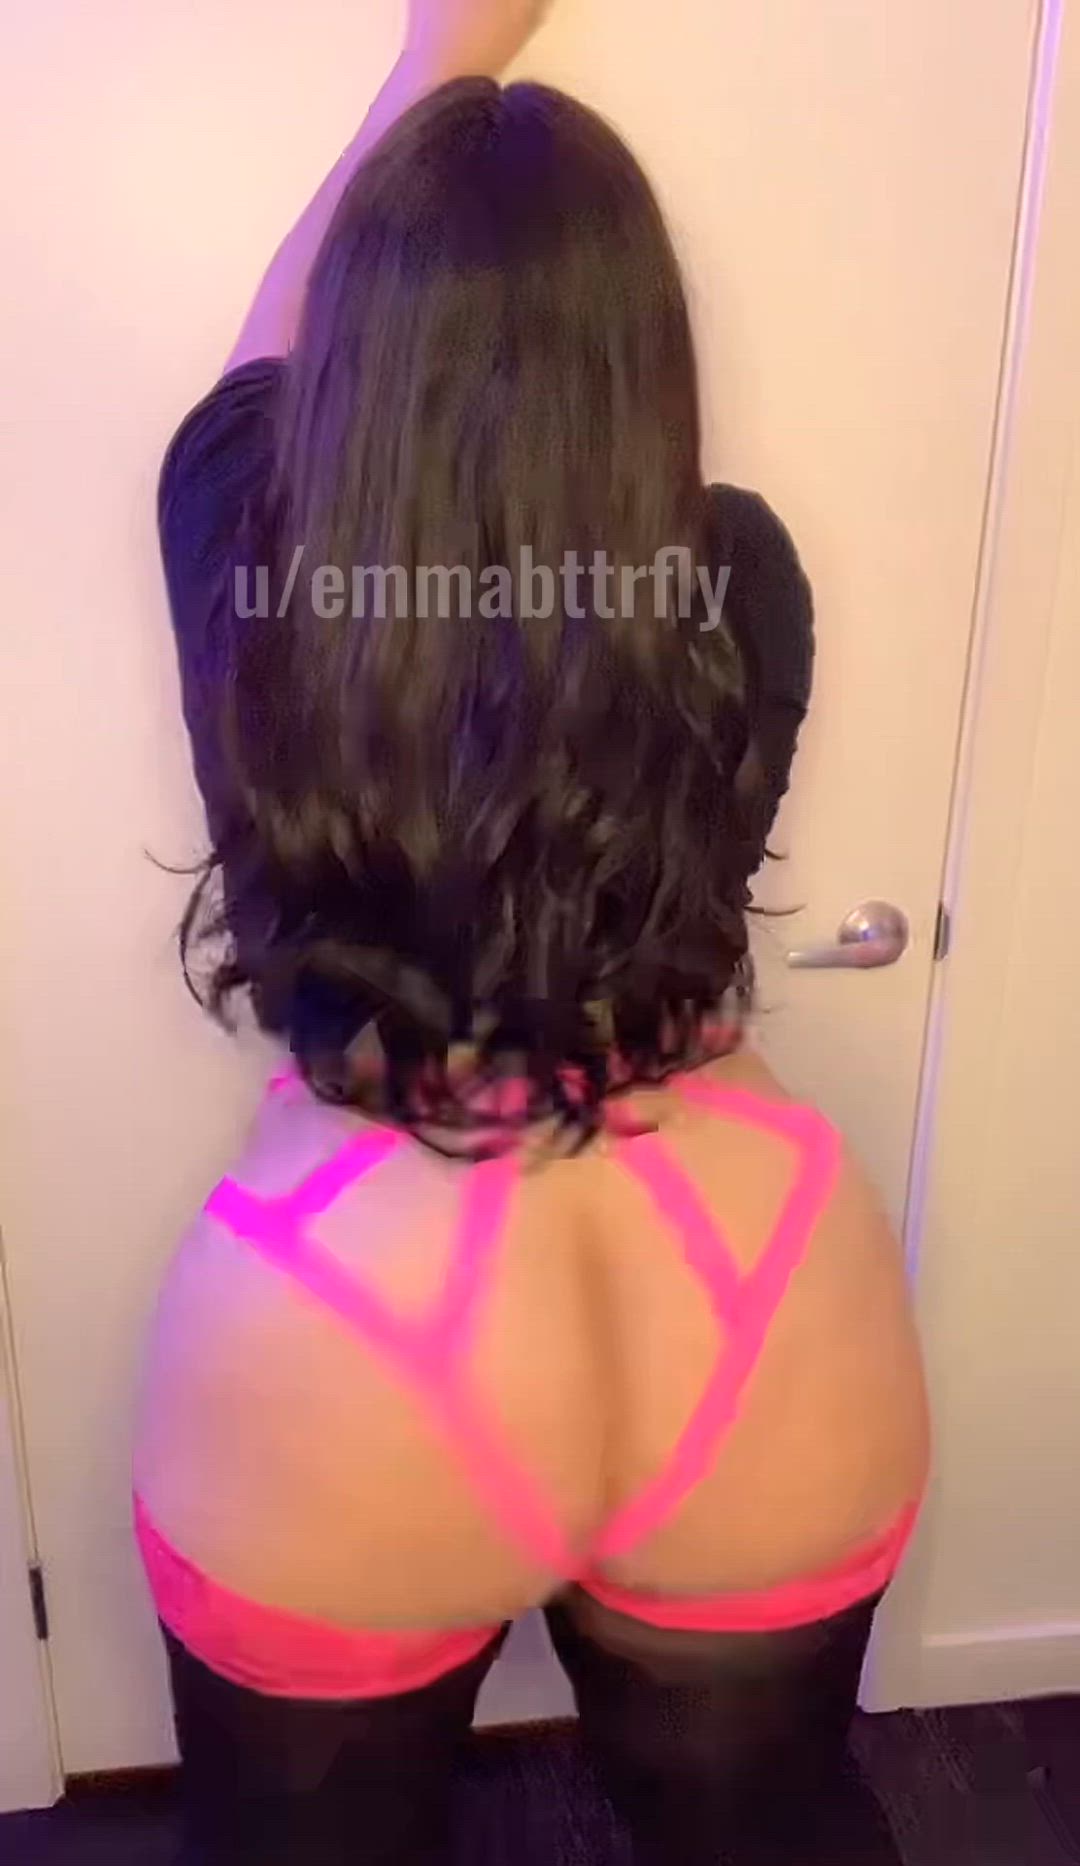 Ass porn video with onlyfans model Emma Butterfly <strong>@emmabttrfly</strong>